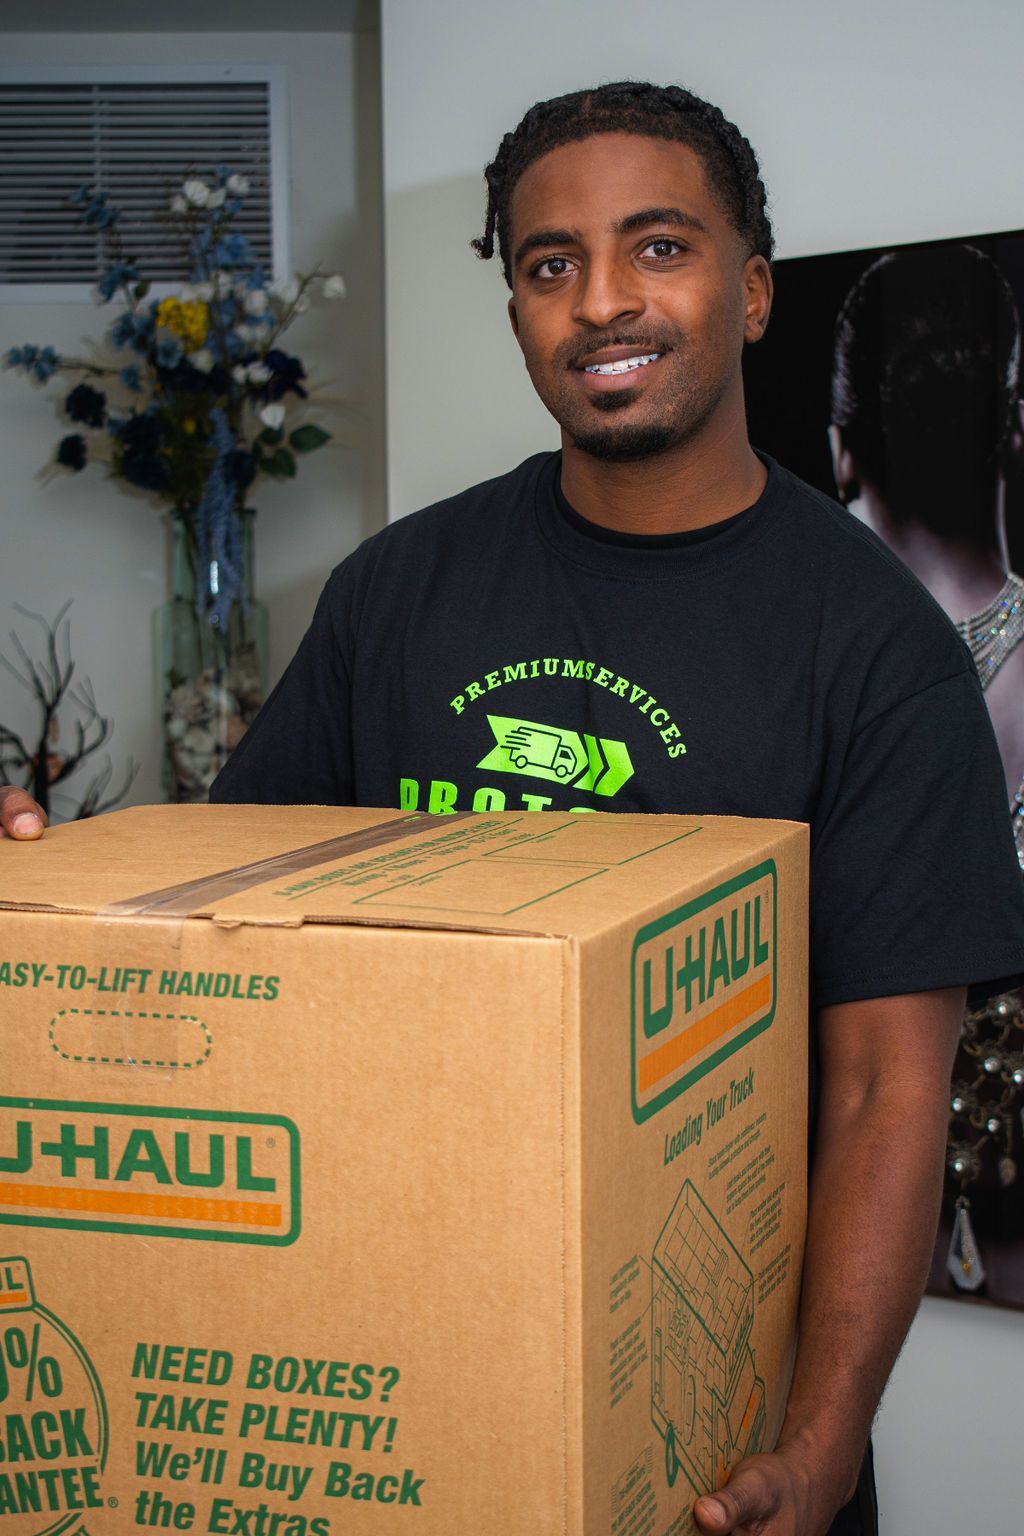 Mover smiling holding a box